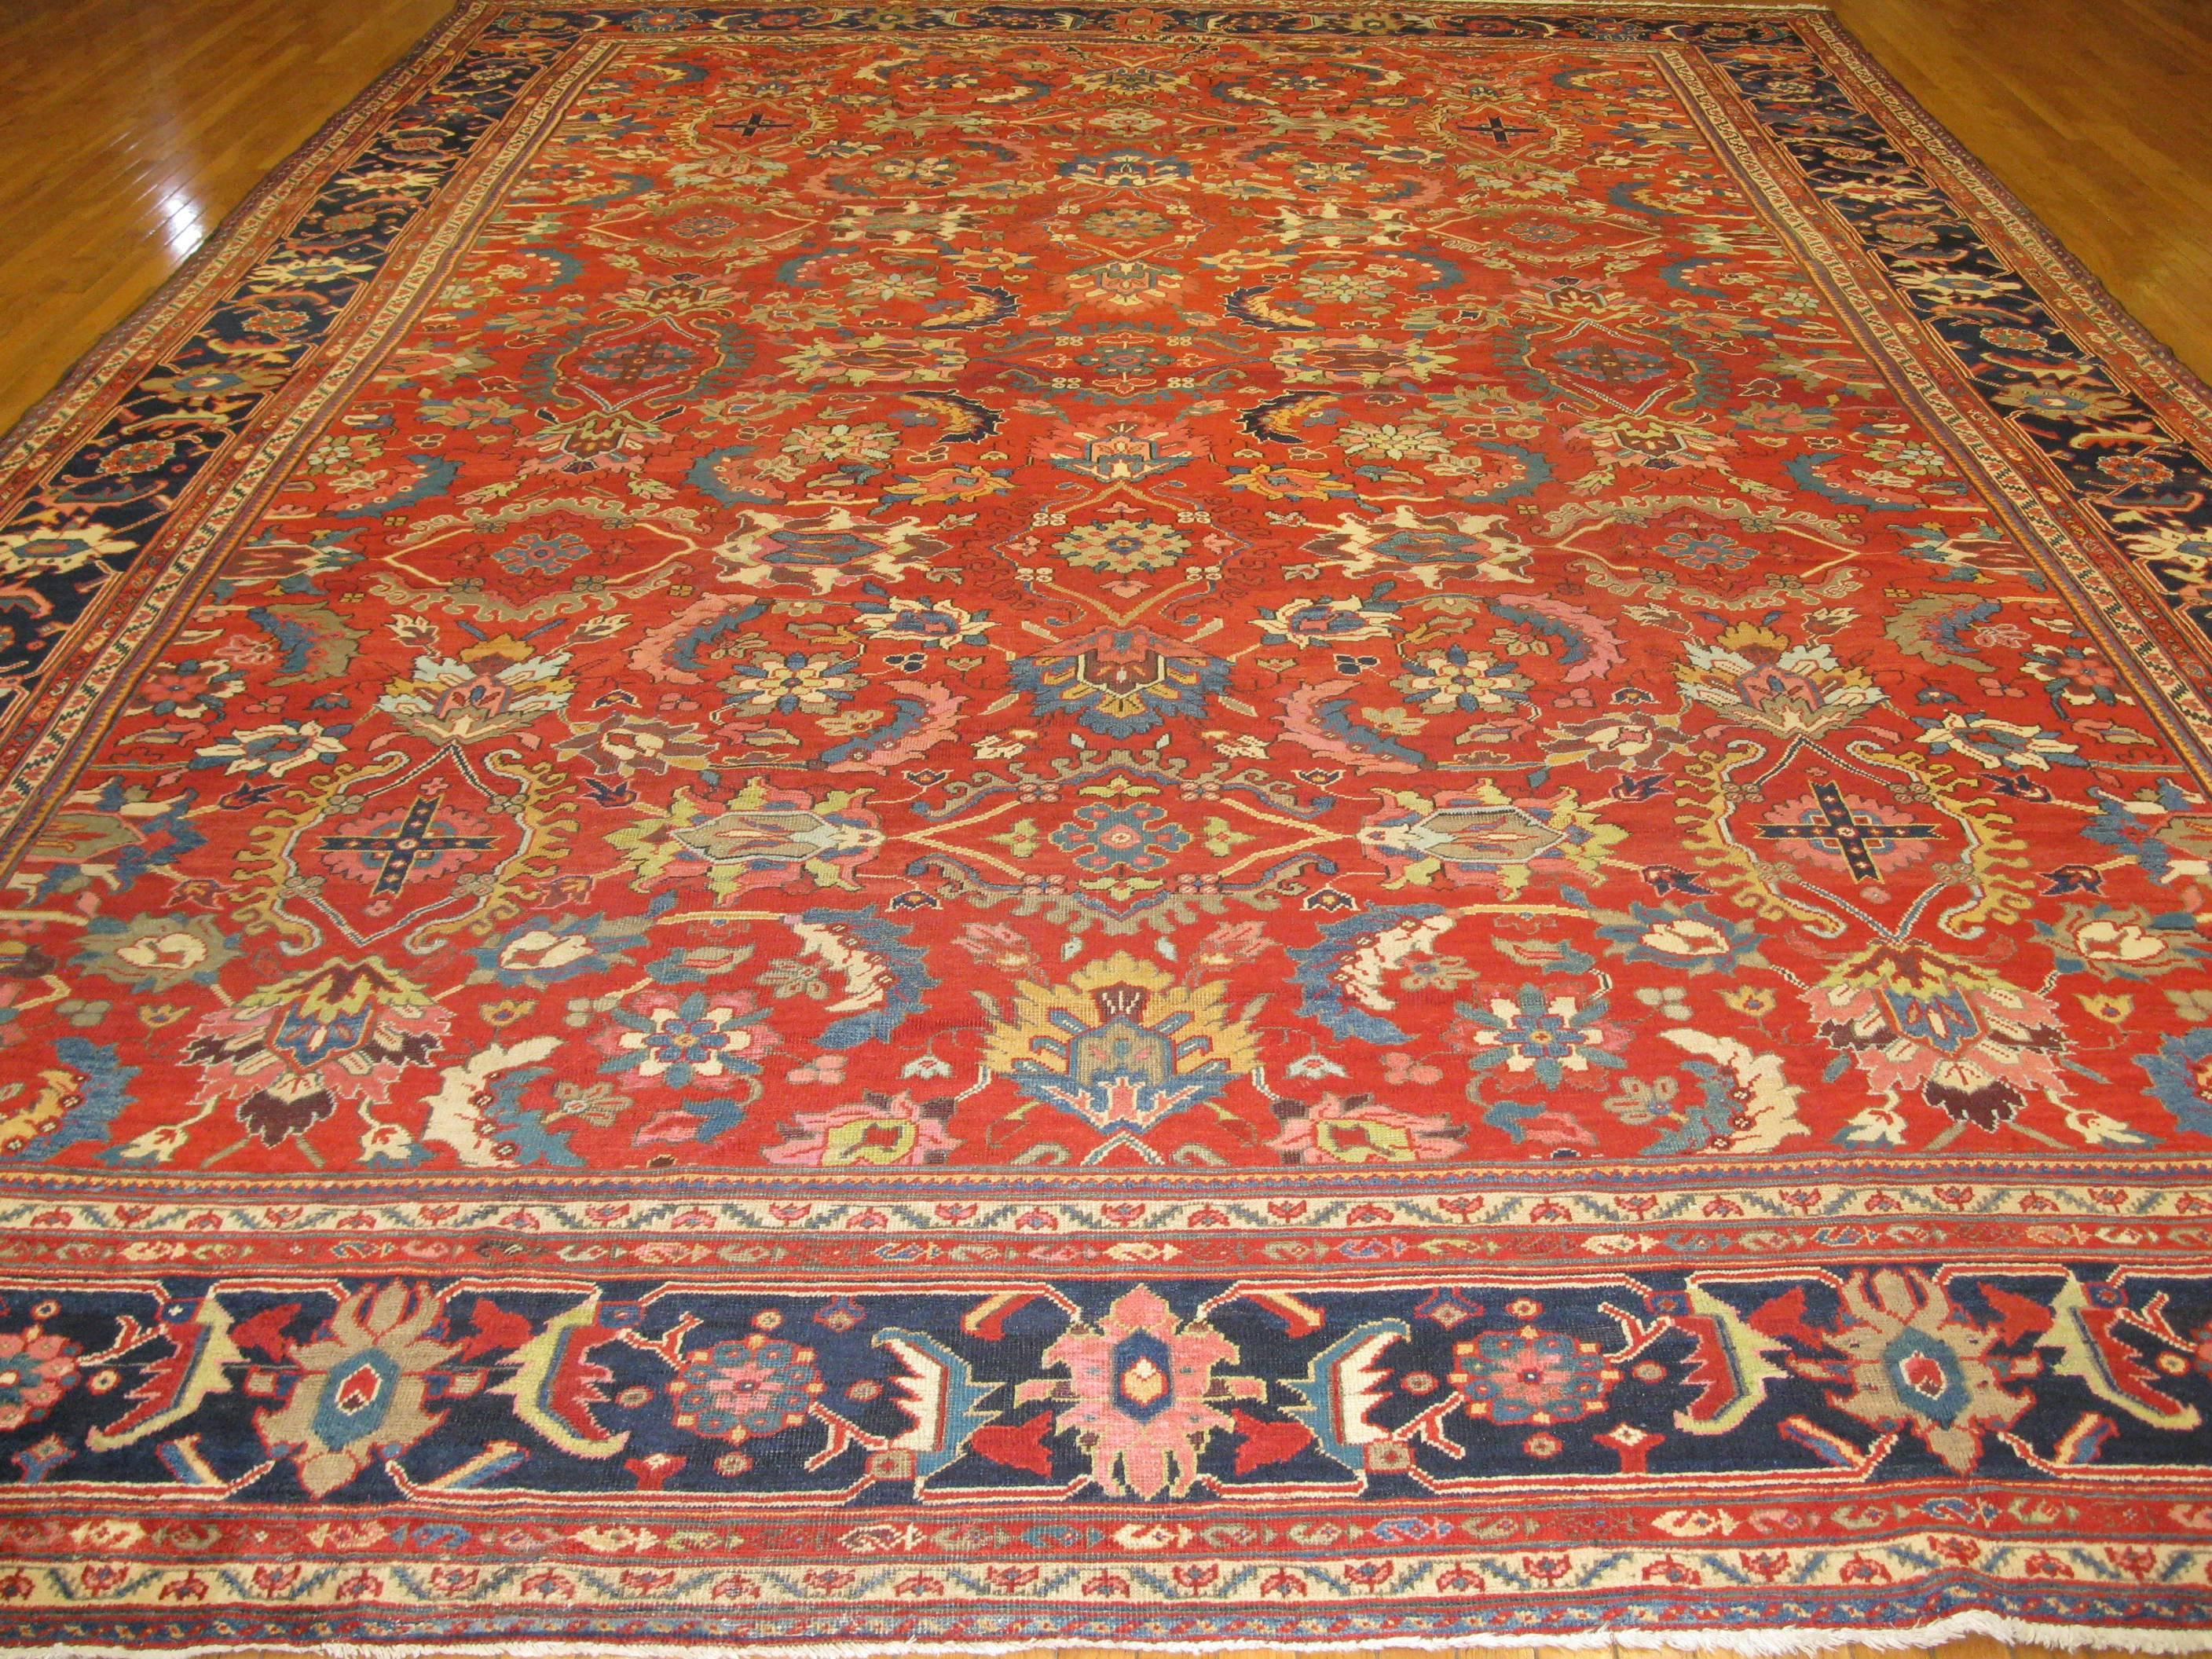 This beautiful handmade rug was made in the village of Mahal near the city of Hamadan in Iran. It is a fine rug with an all-over semi floral pattern on a red field and navy blue border. The rug measures 11' 10'' x 17' 6'' and in great condition.